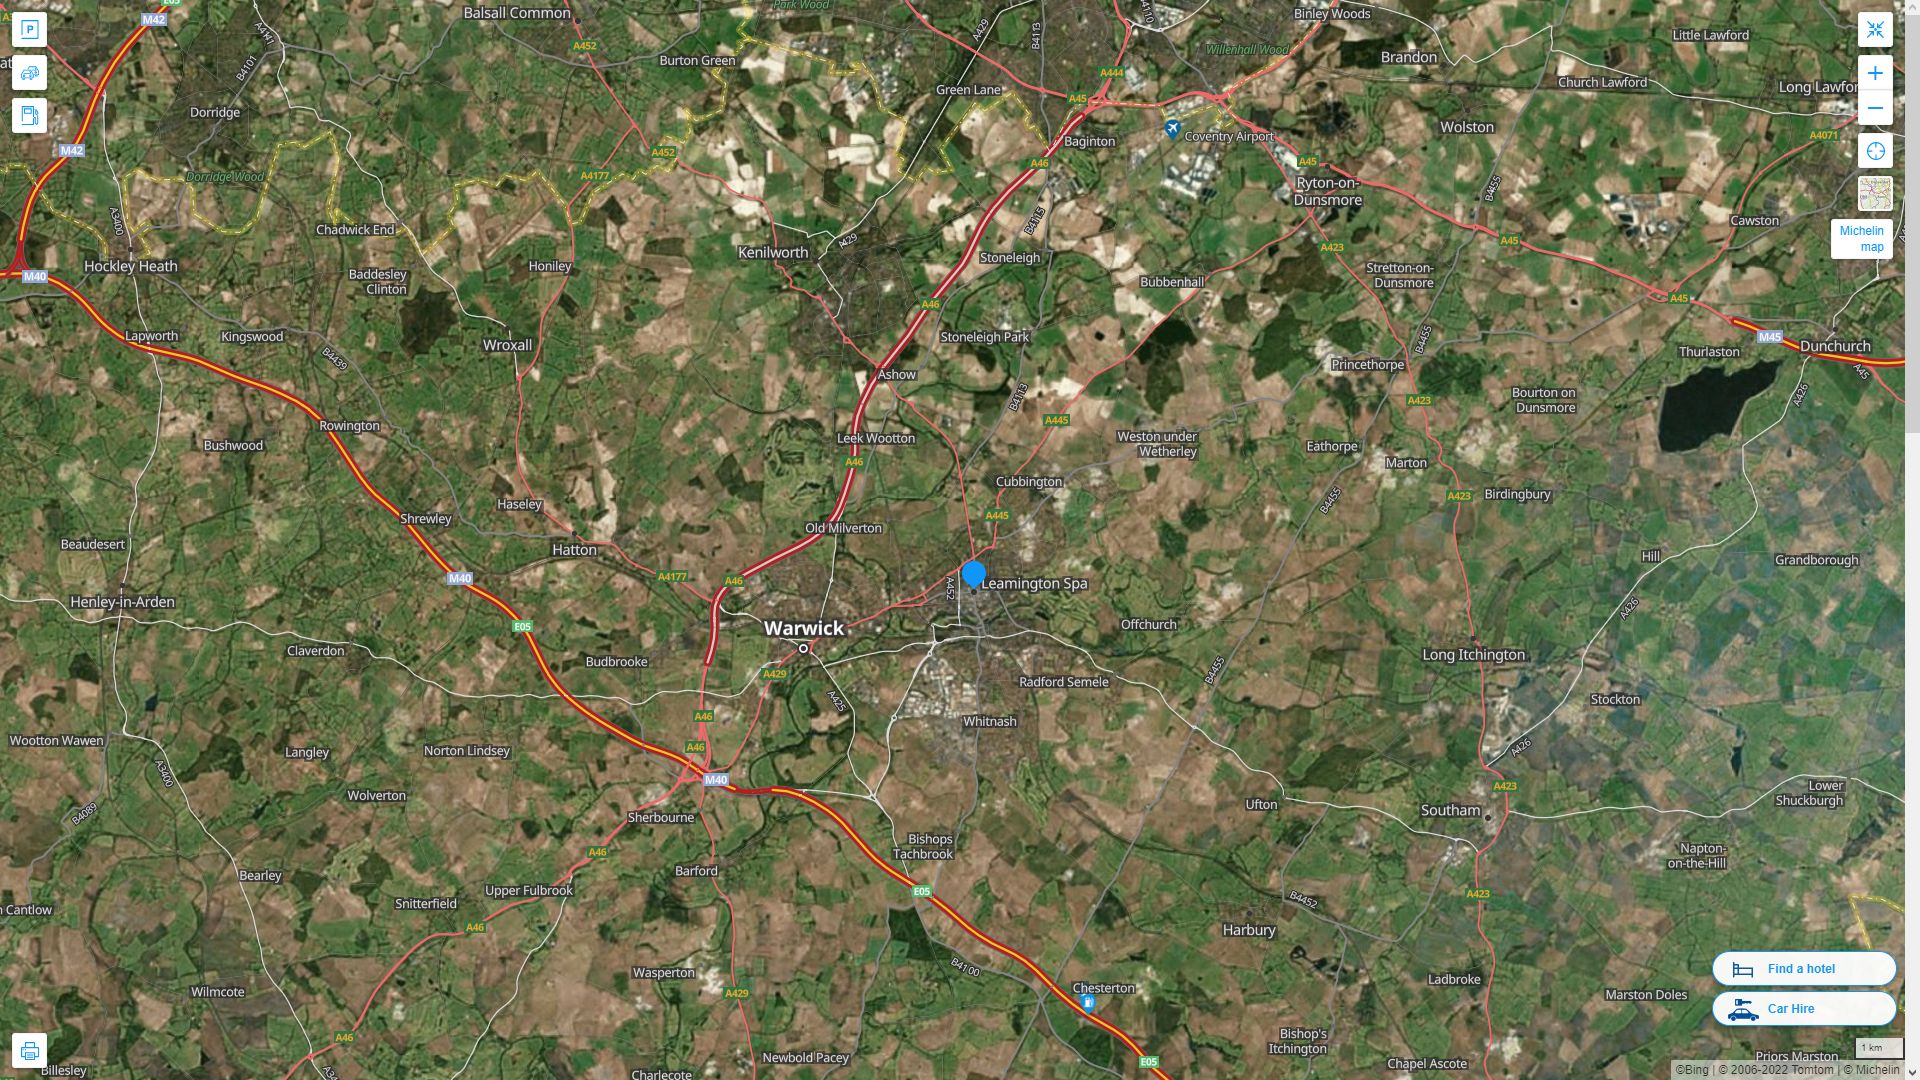 Royal Leamington Spa Highway and Road Map with Satellite View